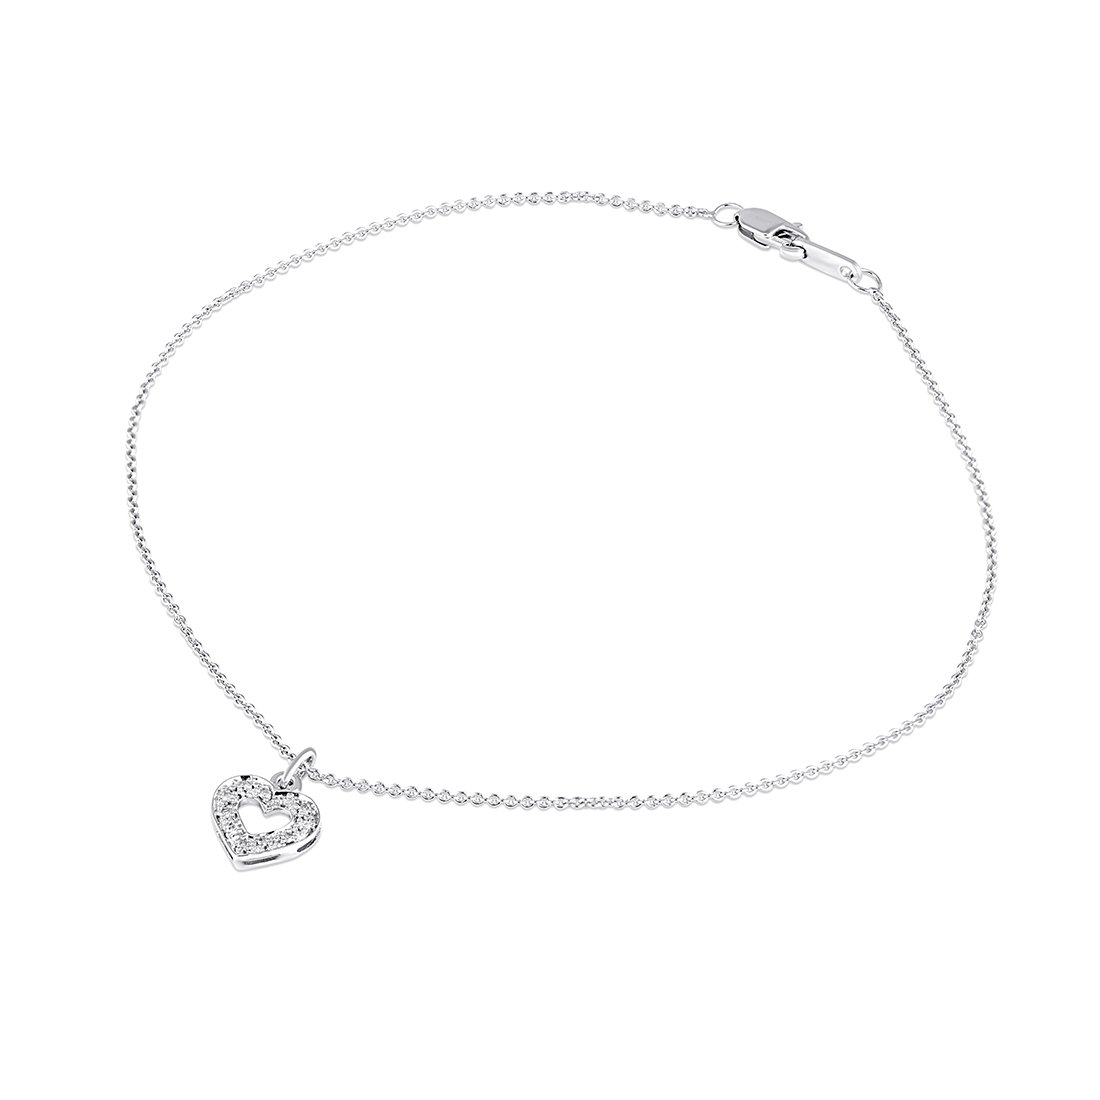 Mirage Diamond Set Open Heart Double Chain Anklet in Sterling Silver Anklet Bevilles 